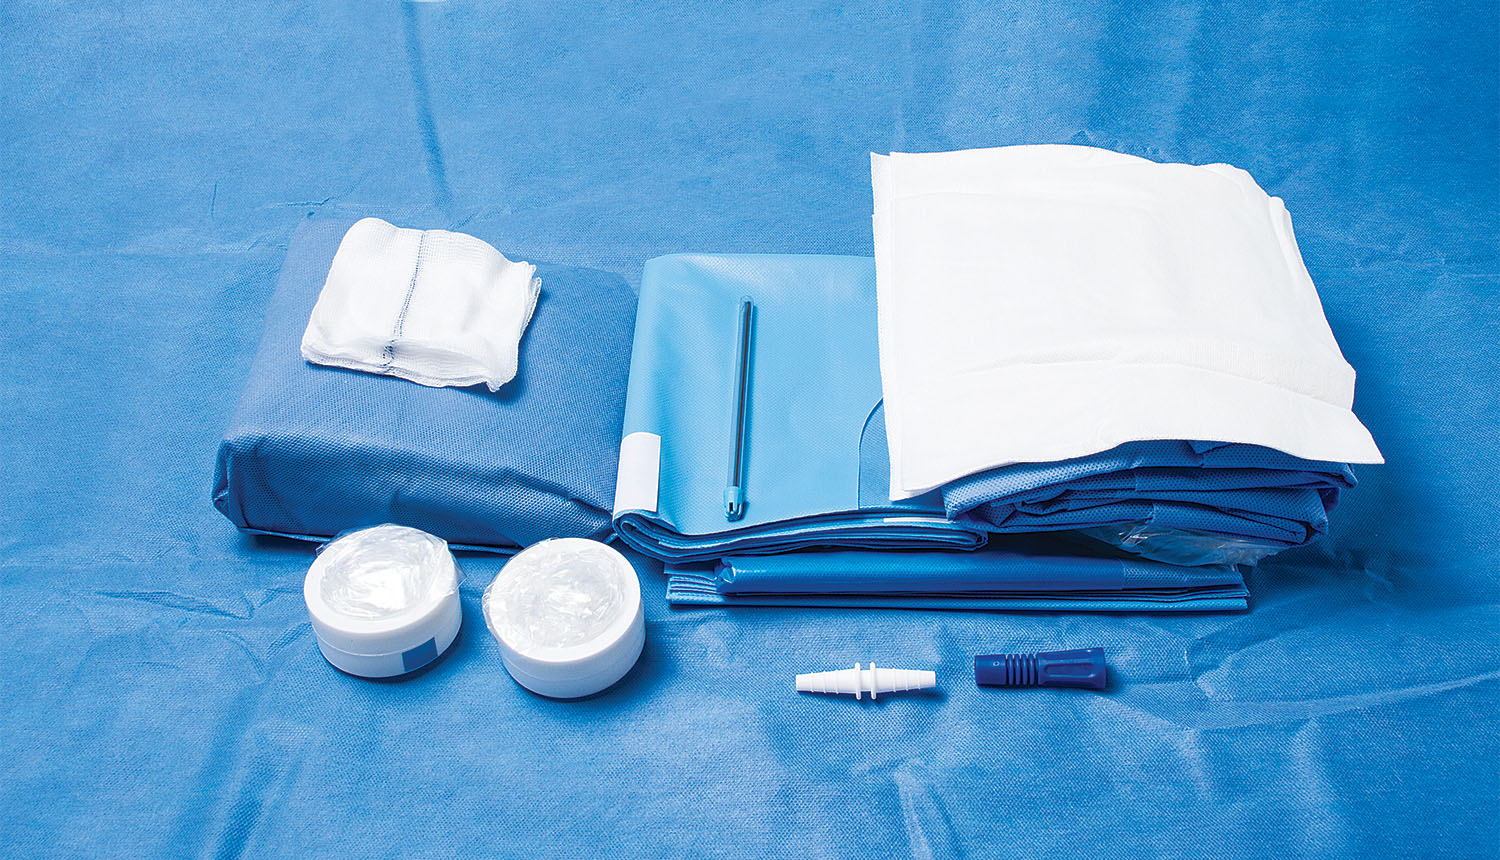 Standard Implant and Oral Surgery Procedure Pack